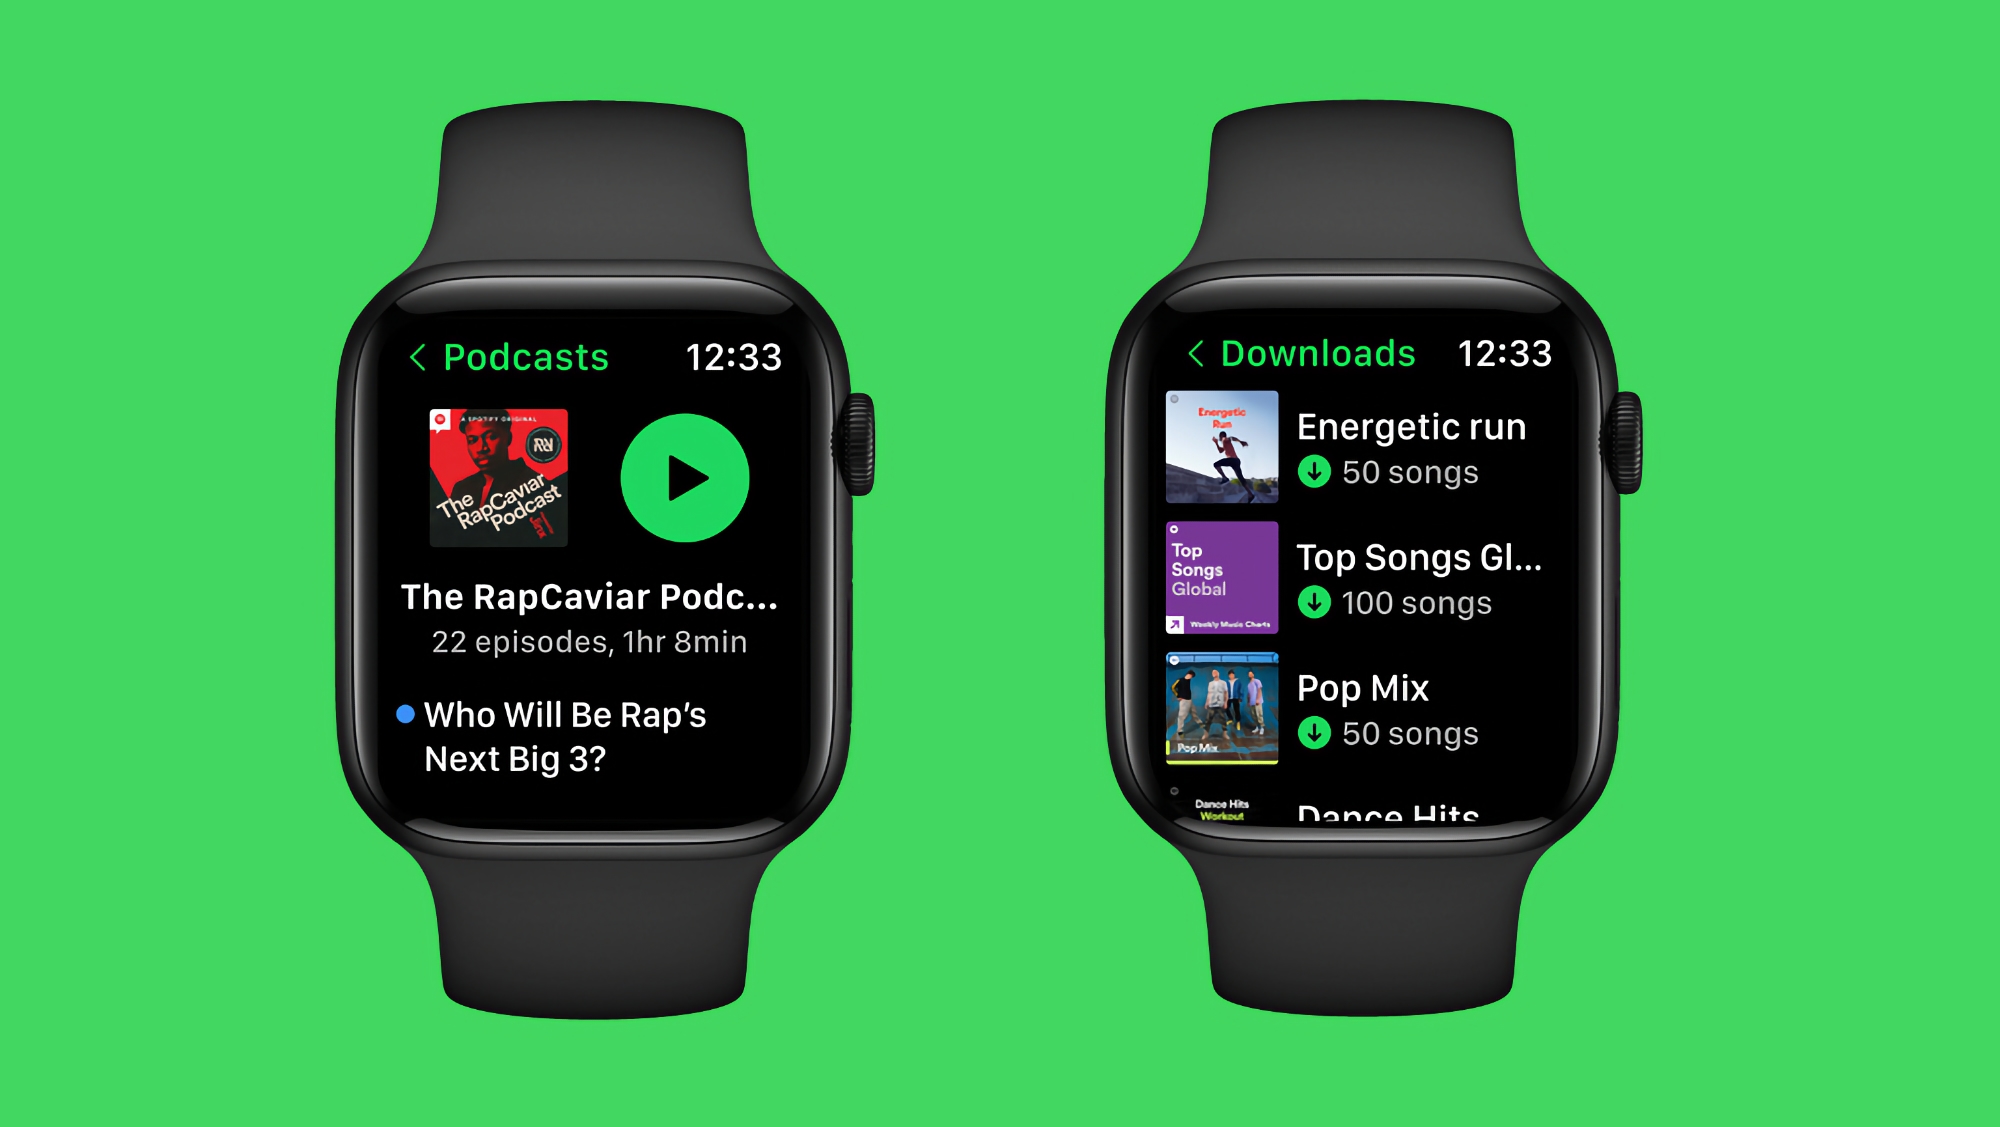 Spotify introduced a new version of the app for the Apple Watch